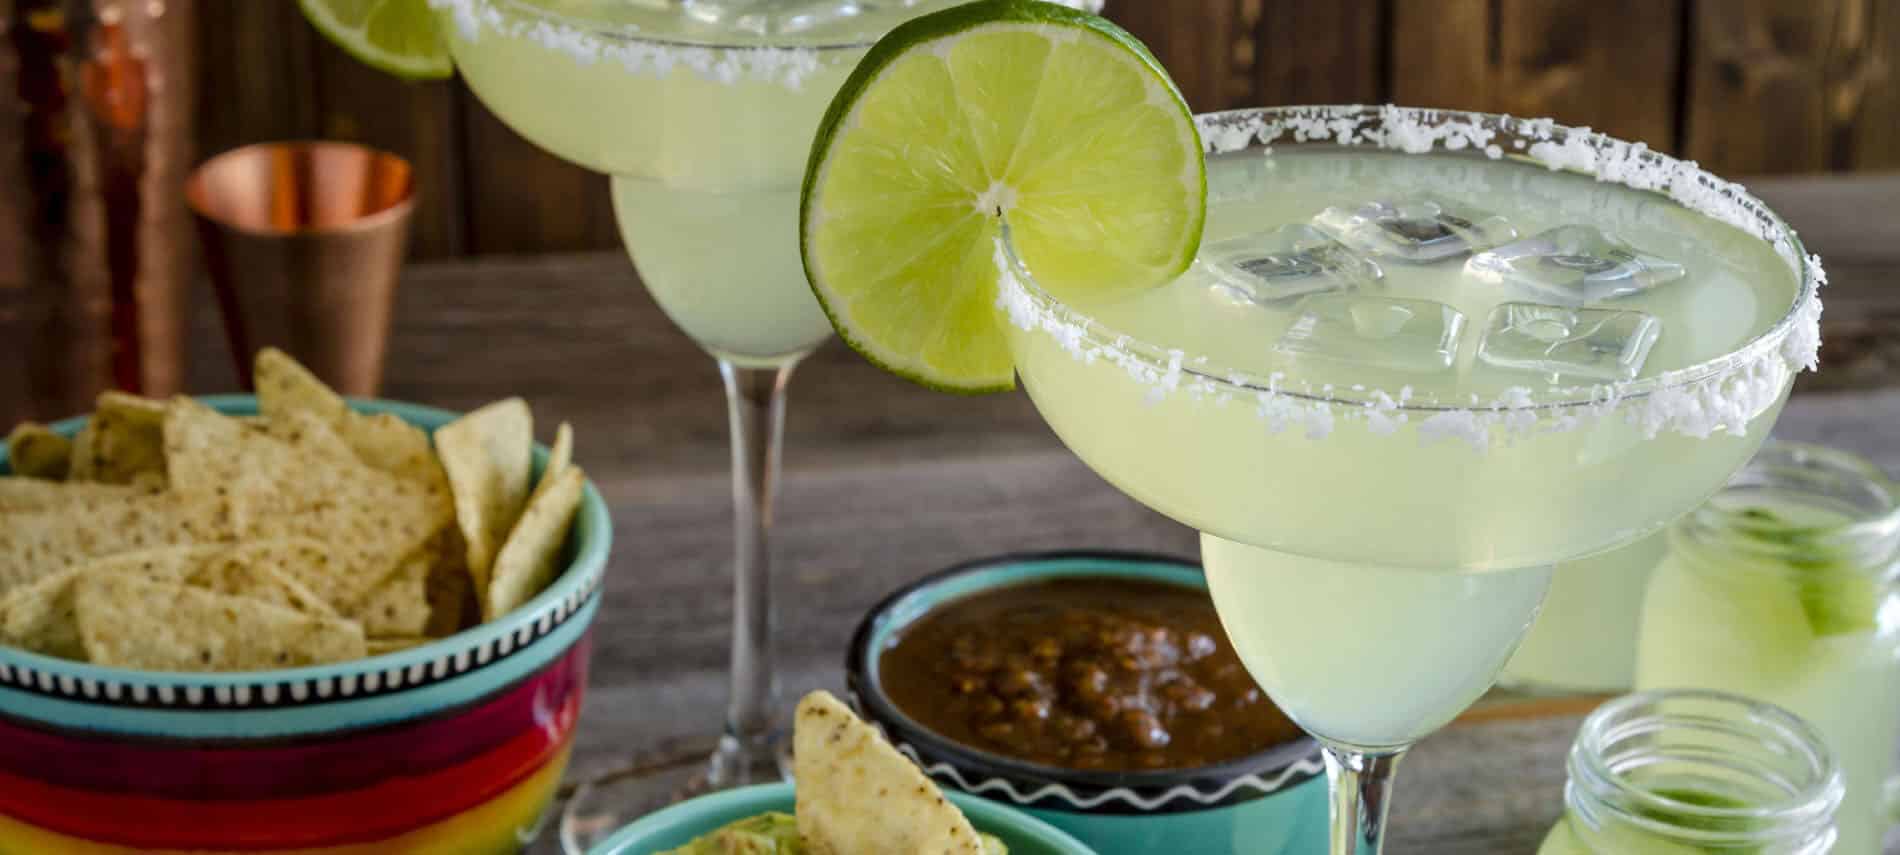 Margaritas with Lime, Chips and Salsa